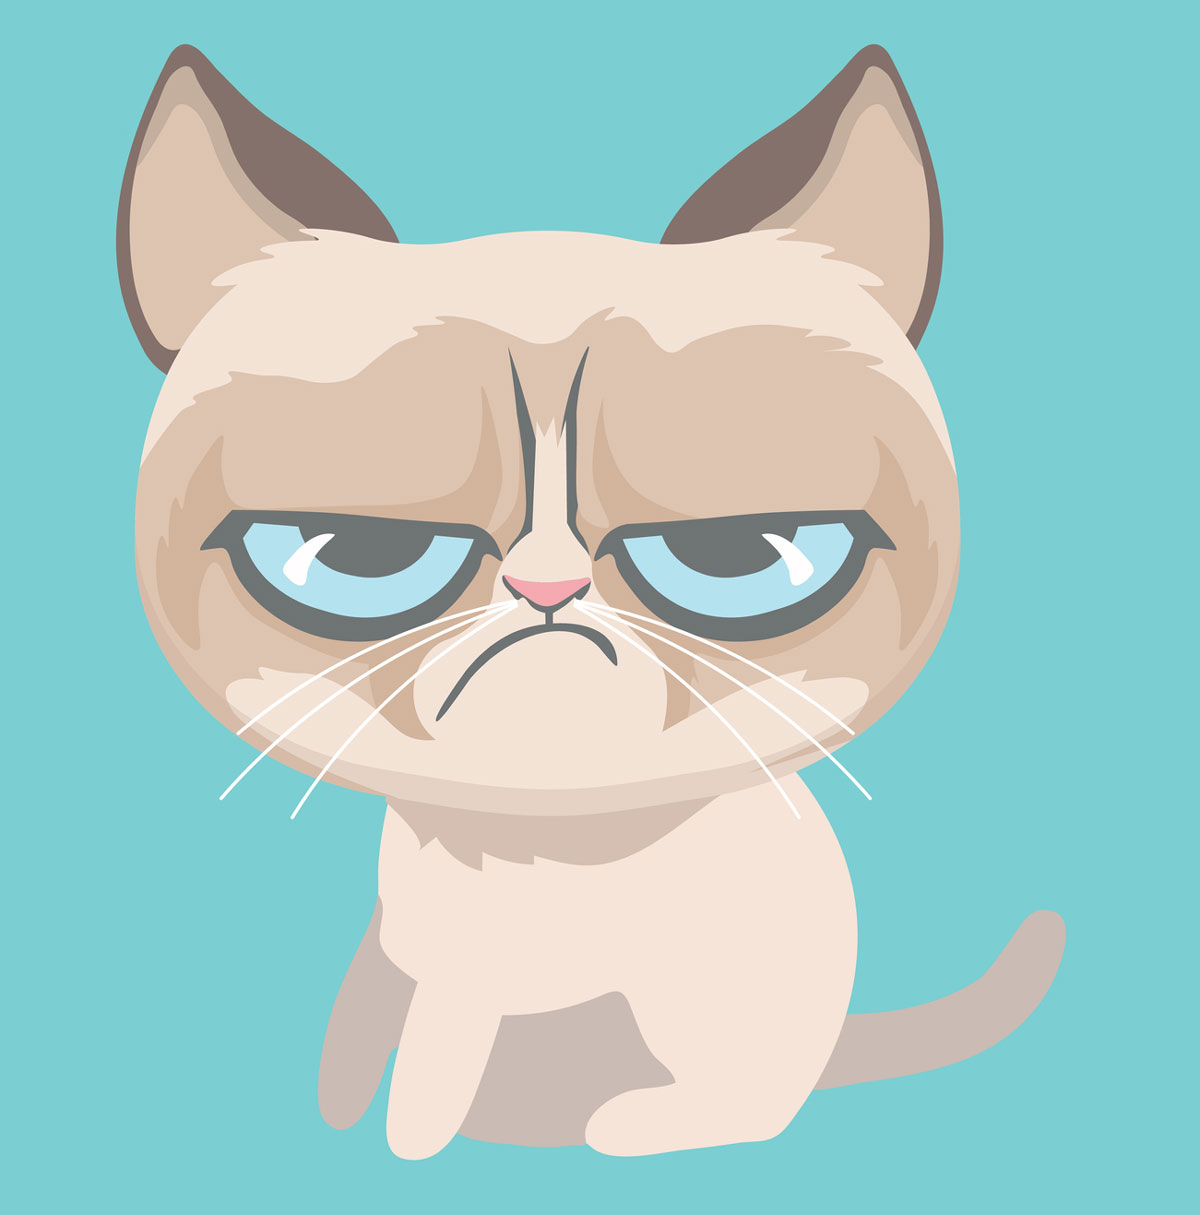 Learn the signs that indicate a cat is mad.